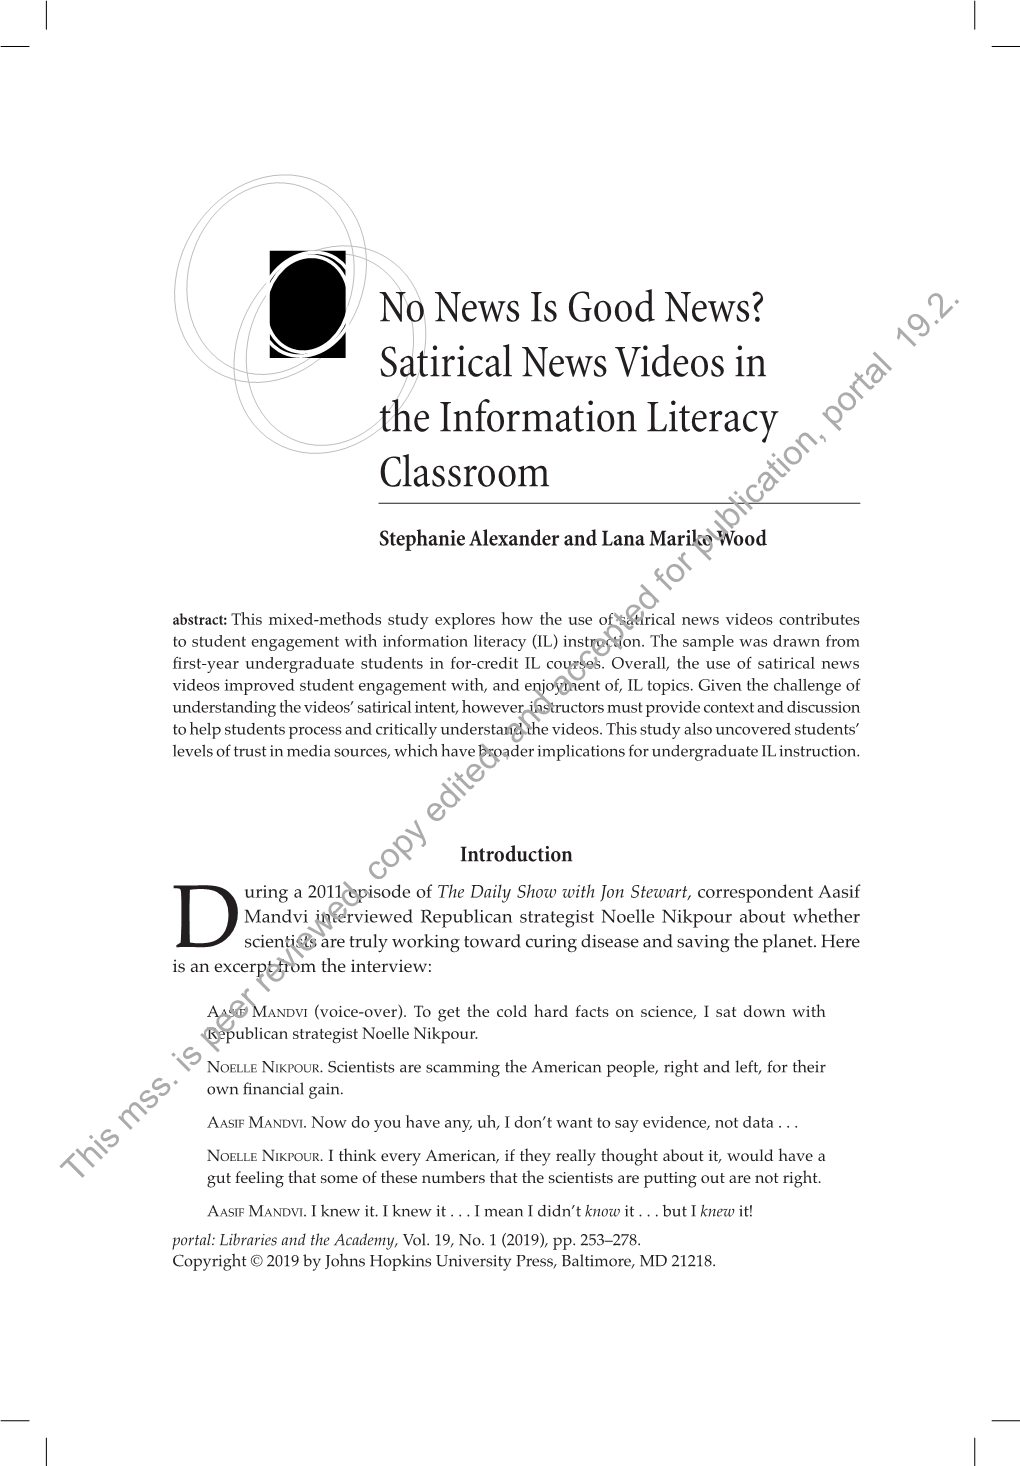 Satirical News Videos in the Information Literacy Classroom